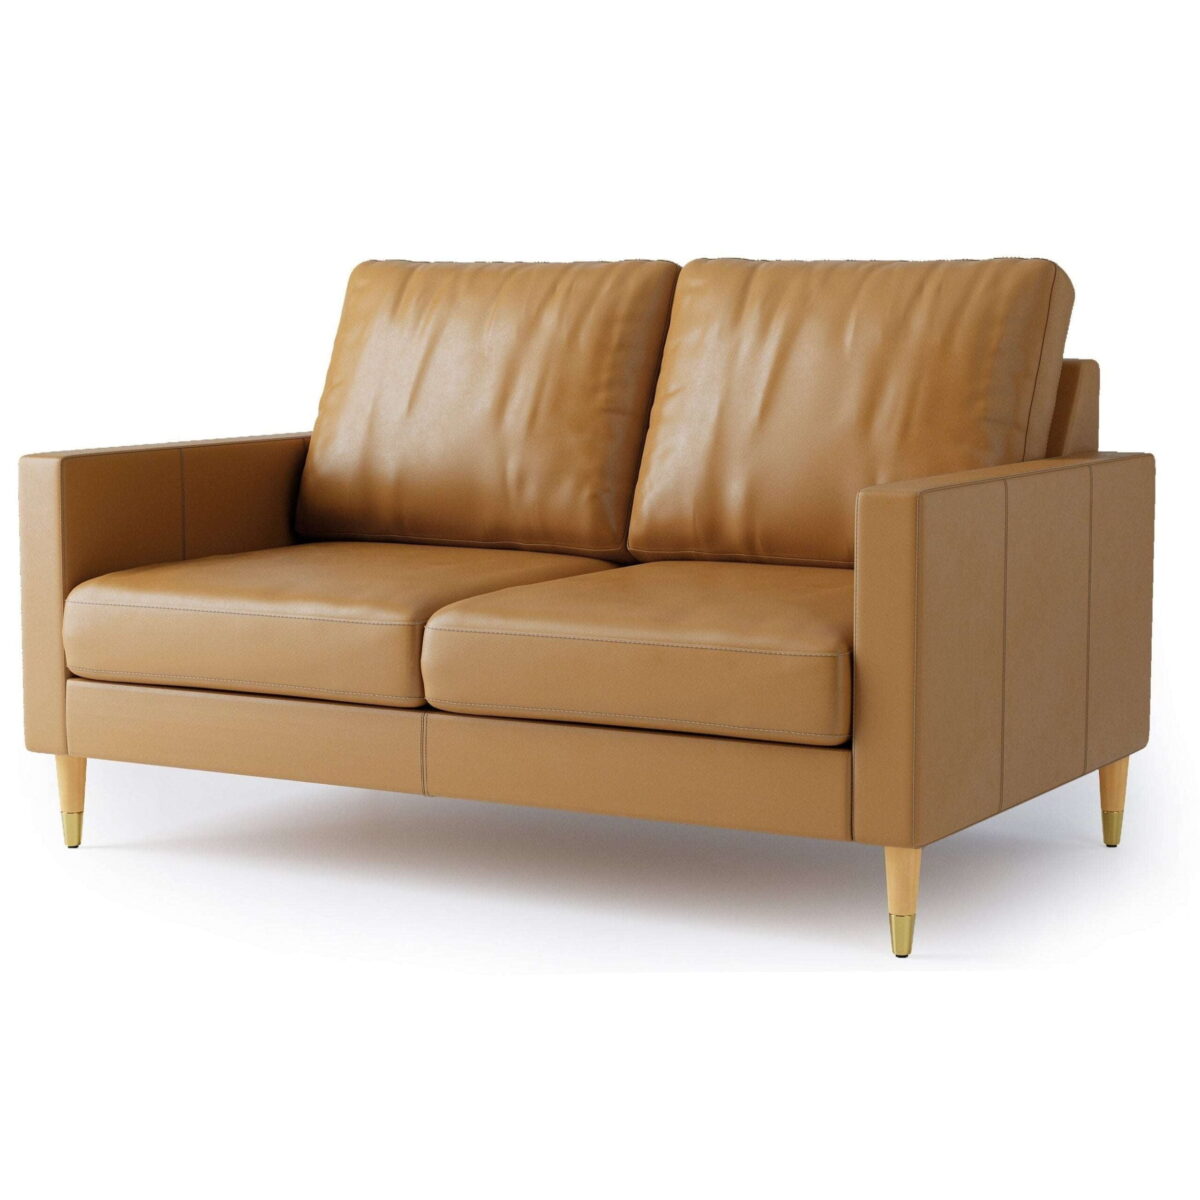 Classic Elegance: Timeless Loveseat for Refined Spaces